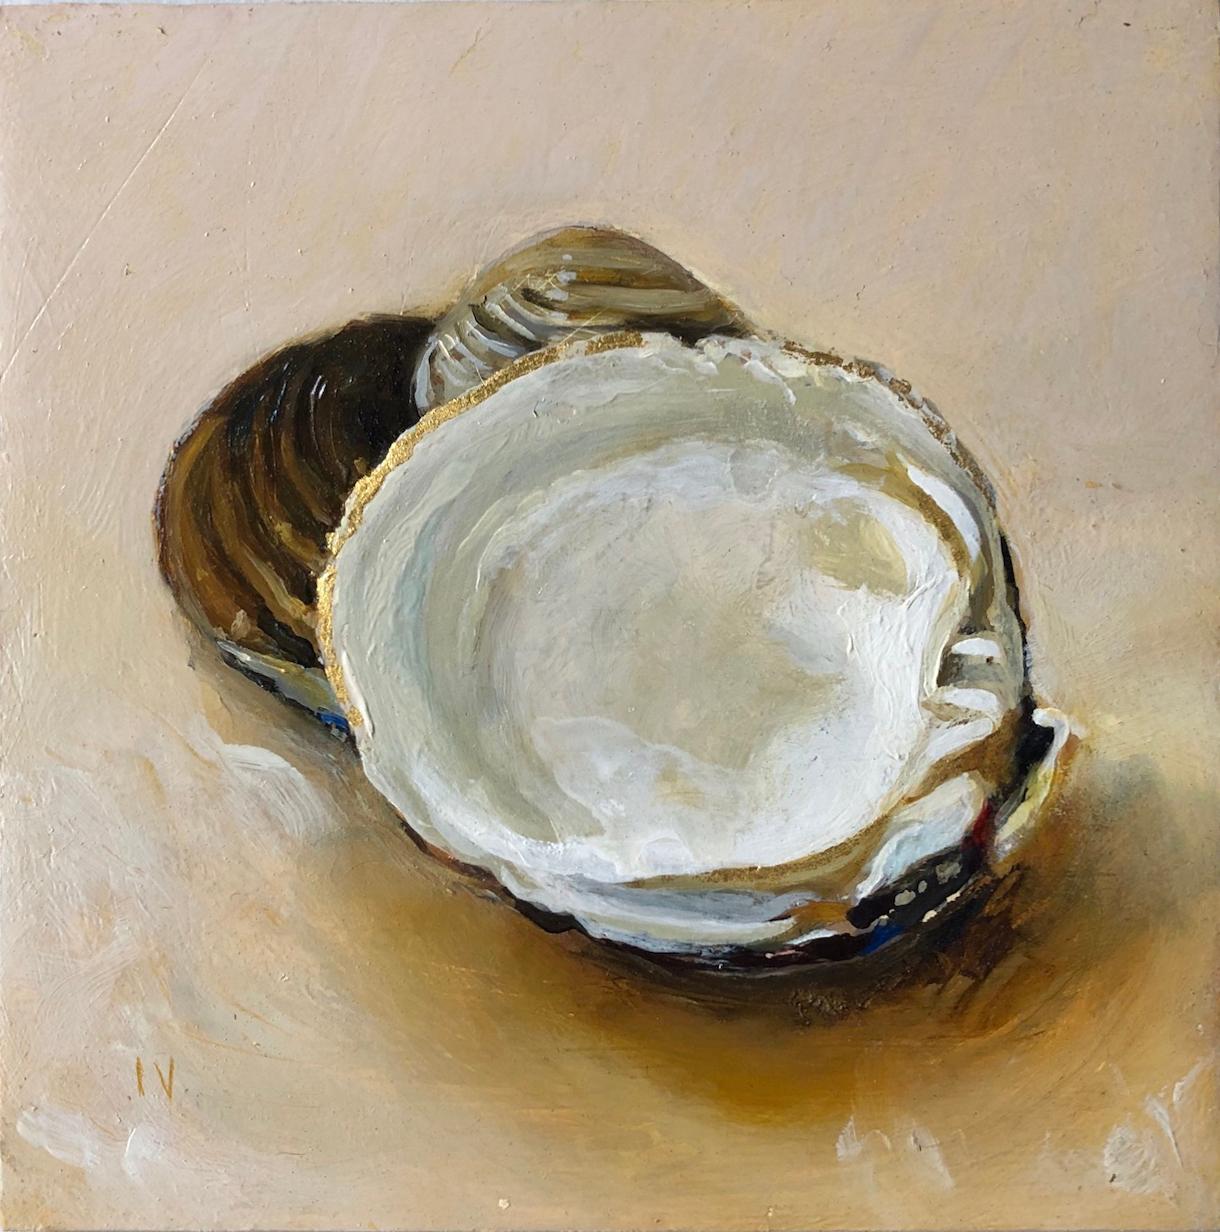 Clams #9 (Contemporary Realist Still Life of Clam Shell with Gold Leaf, Framed) - Mixed Media Art by Matthew Hopkins